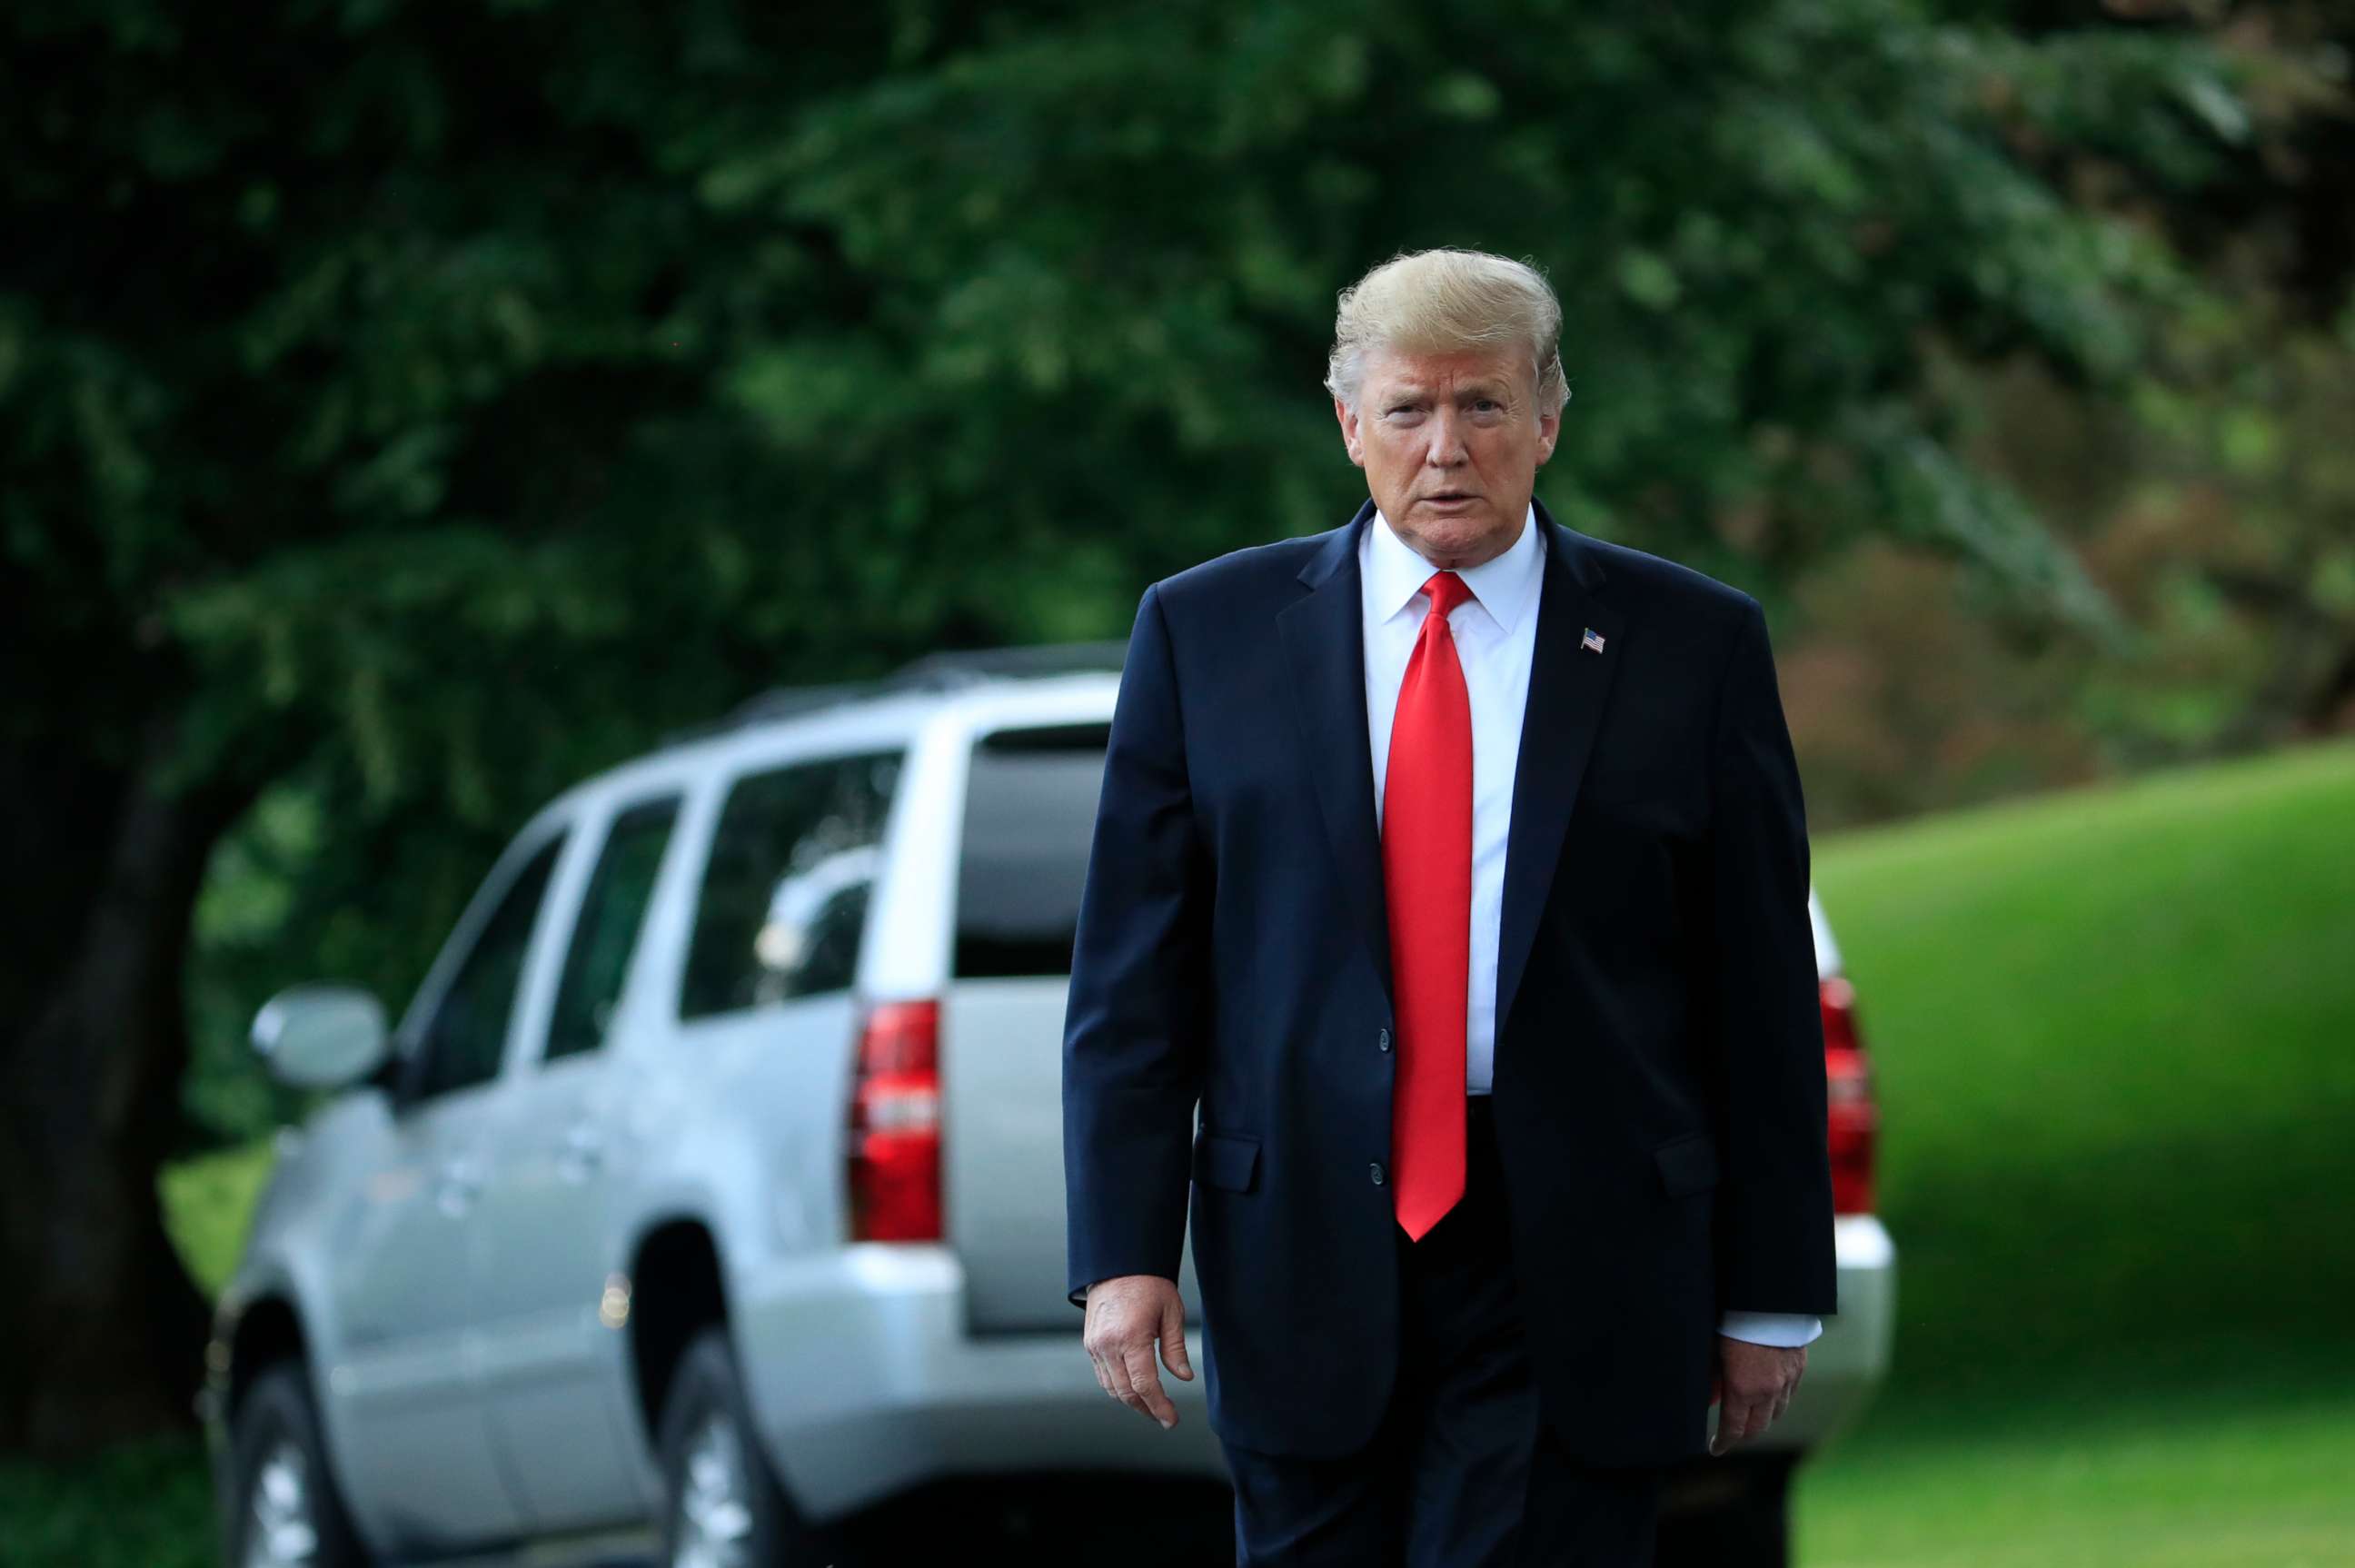 PHOTO: President Donald Trump walks towards the journalist gathered for his departure at the White House in Washington, May 20, 2019.